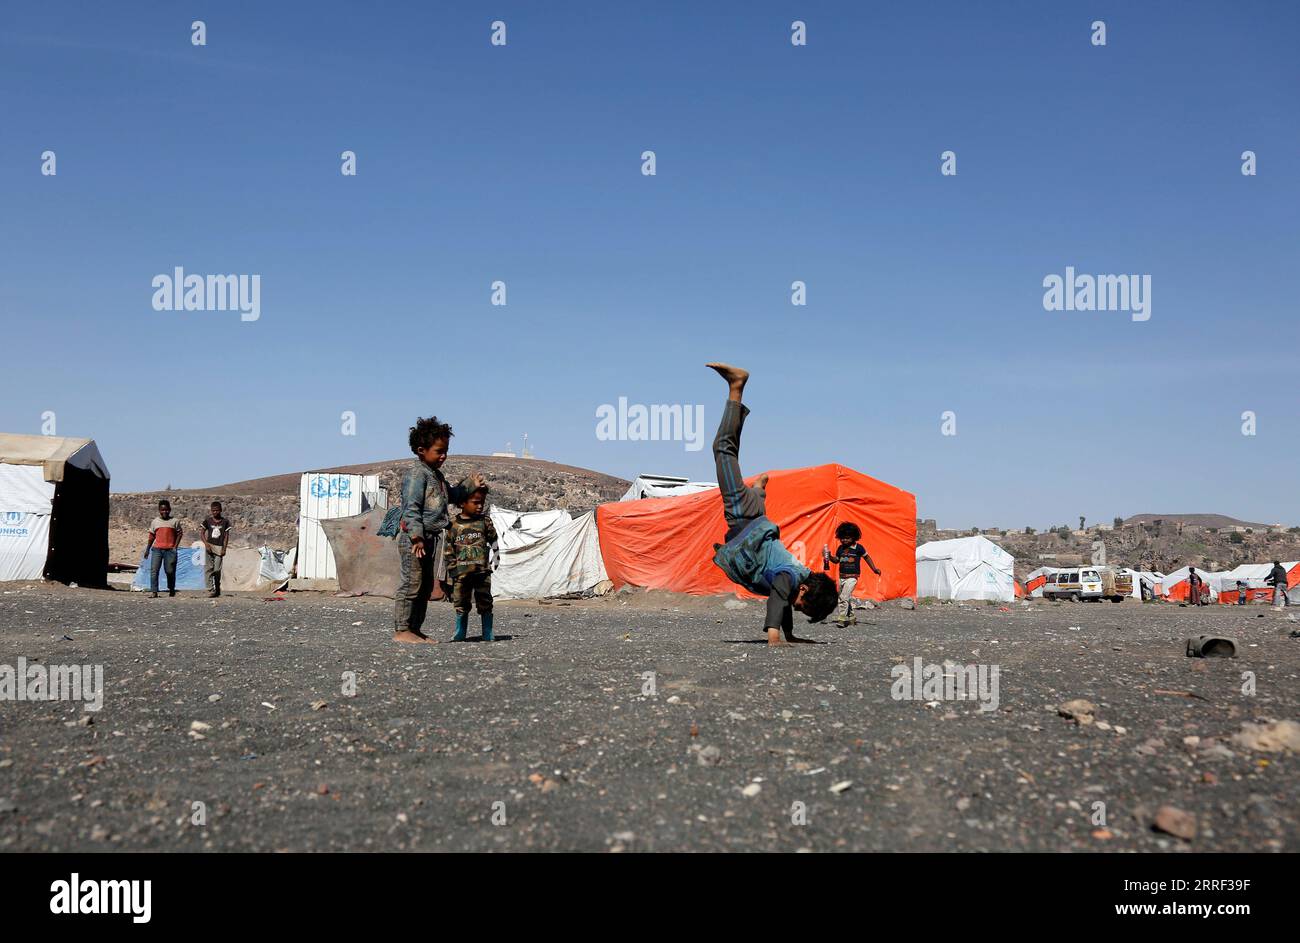 220325 -- SANAA, March 25, 2022 -- Children play at the Dharawan camp for internally displaced persons IDPs near Sanaa, Yemen, on March 25, 2022. Yemen has been mired in a civil war since late 2014 when the Iran-backed Houthi militia seized control of several northern provinces and forced the Saudi-backed Yemeni government of President Abd-Rabbu Mansour Hadi out of the capital Sanaa. Photo by /Xinhua YEMEN-SANAA-IDP CAMP MohammedxMohammed PUBLICATIONxNOTxINxCHN Stock Photo